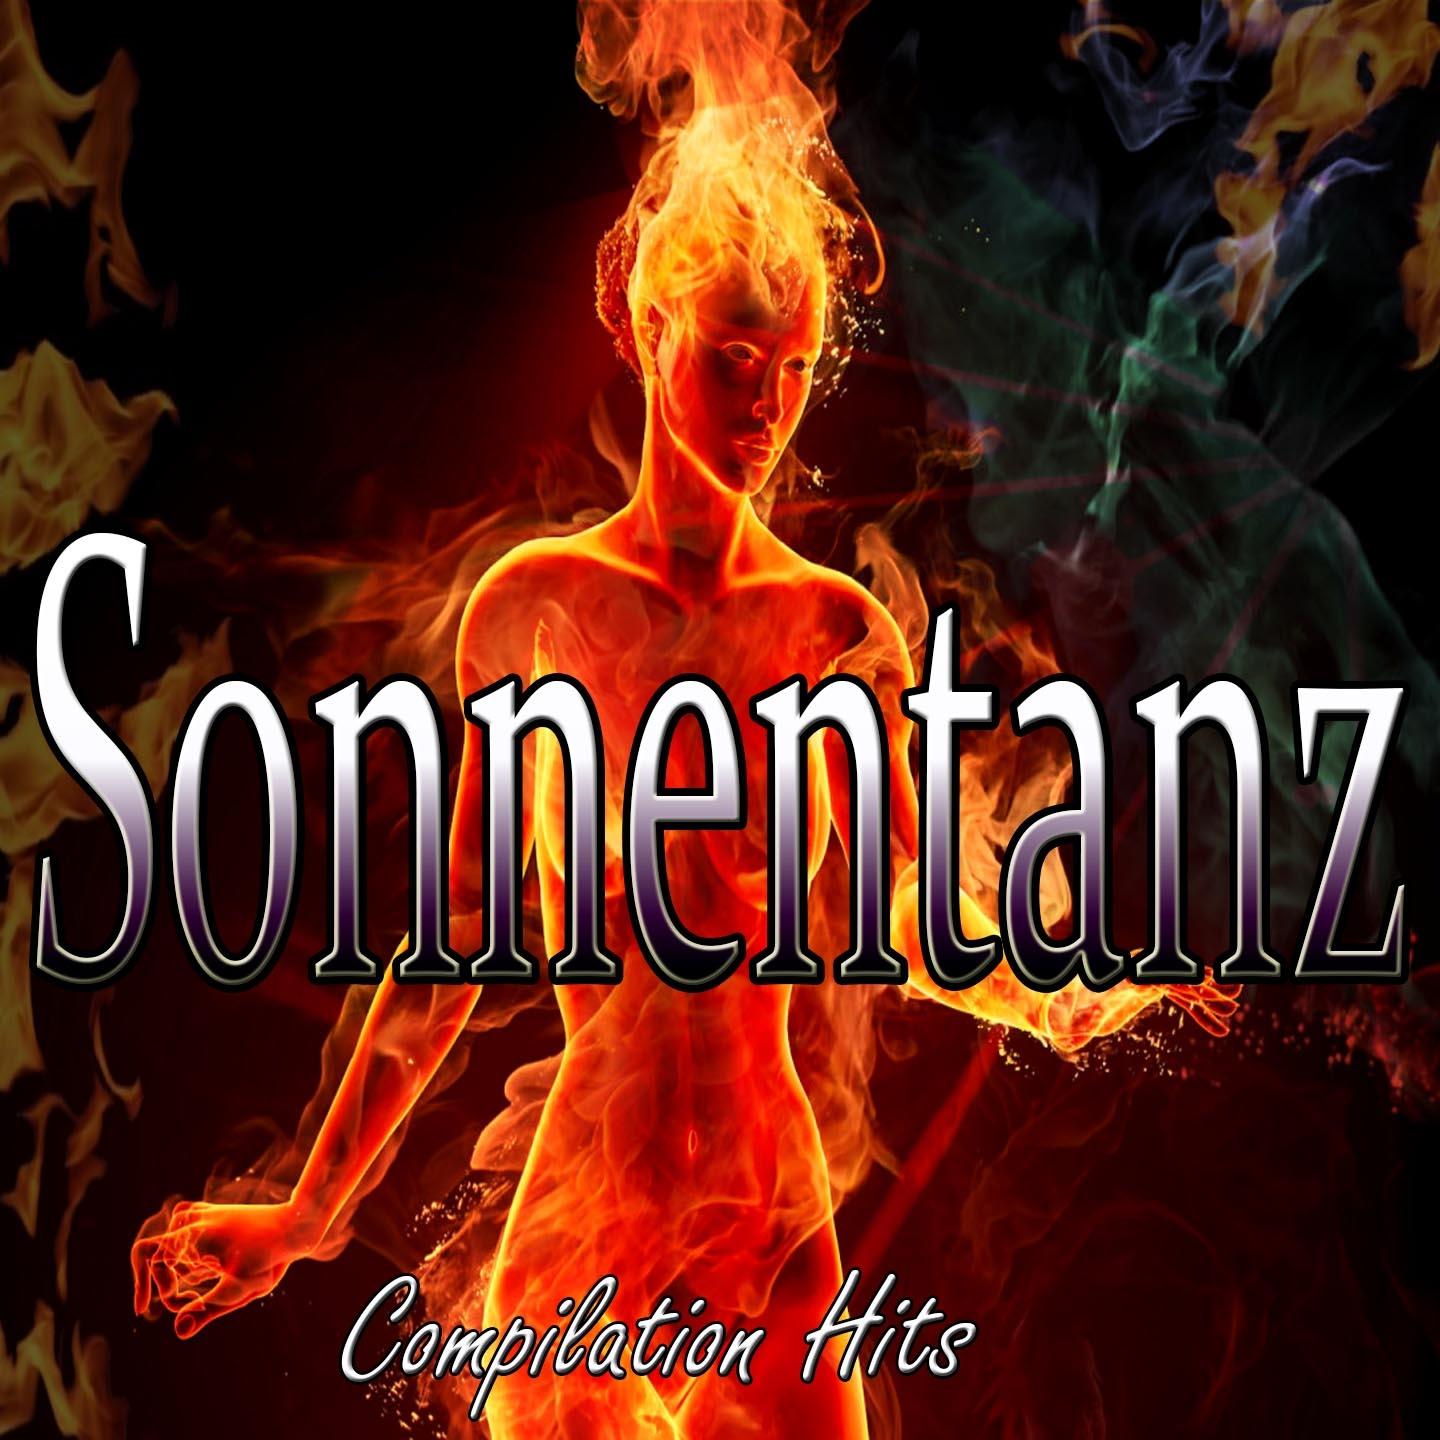 Sonnentanz (Compilation Hits)